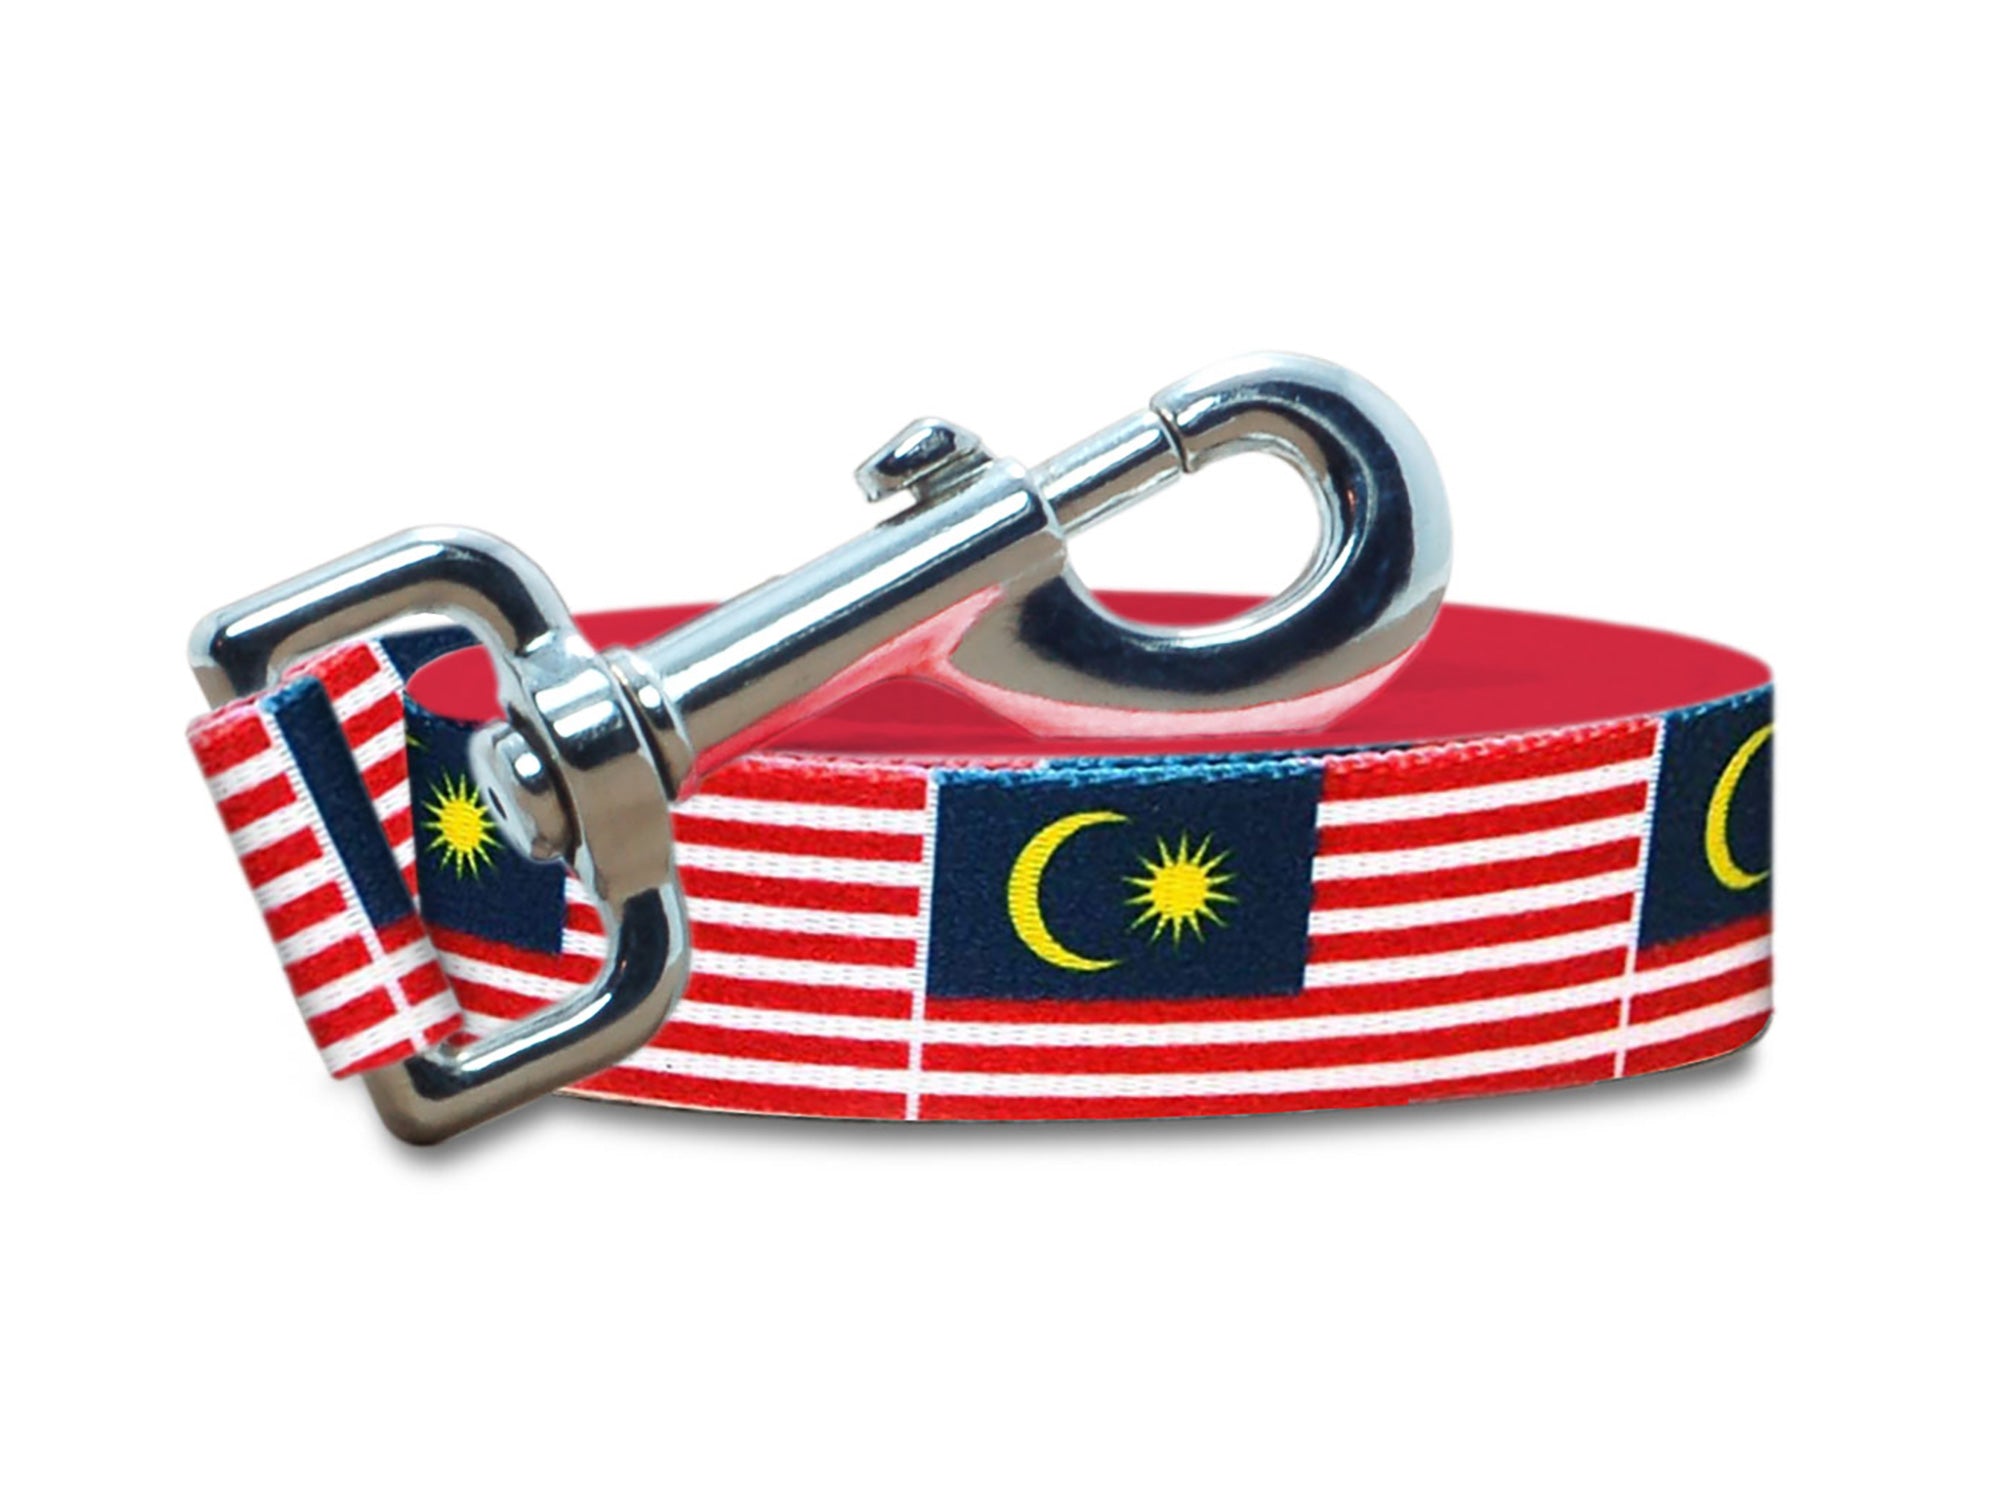 Malaysia Dog Leash | 4 Foot and 6 Foot Lengths | Made in USA